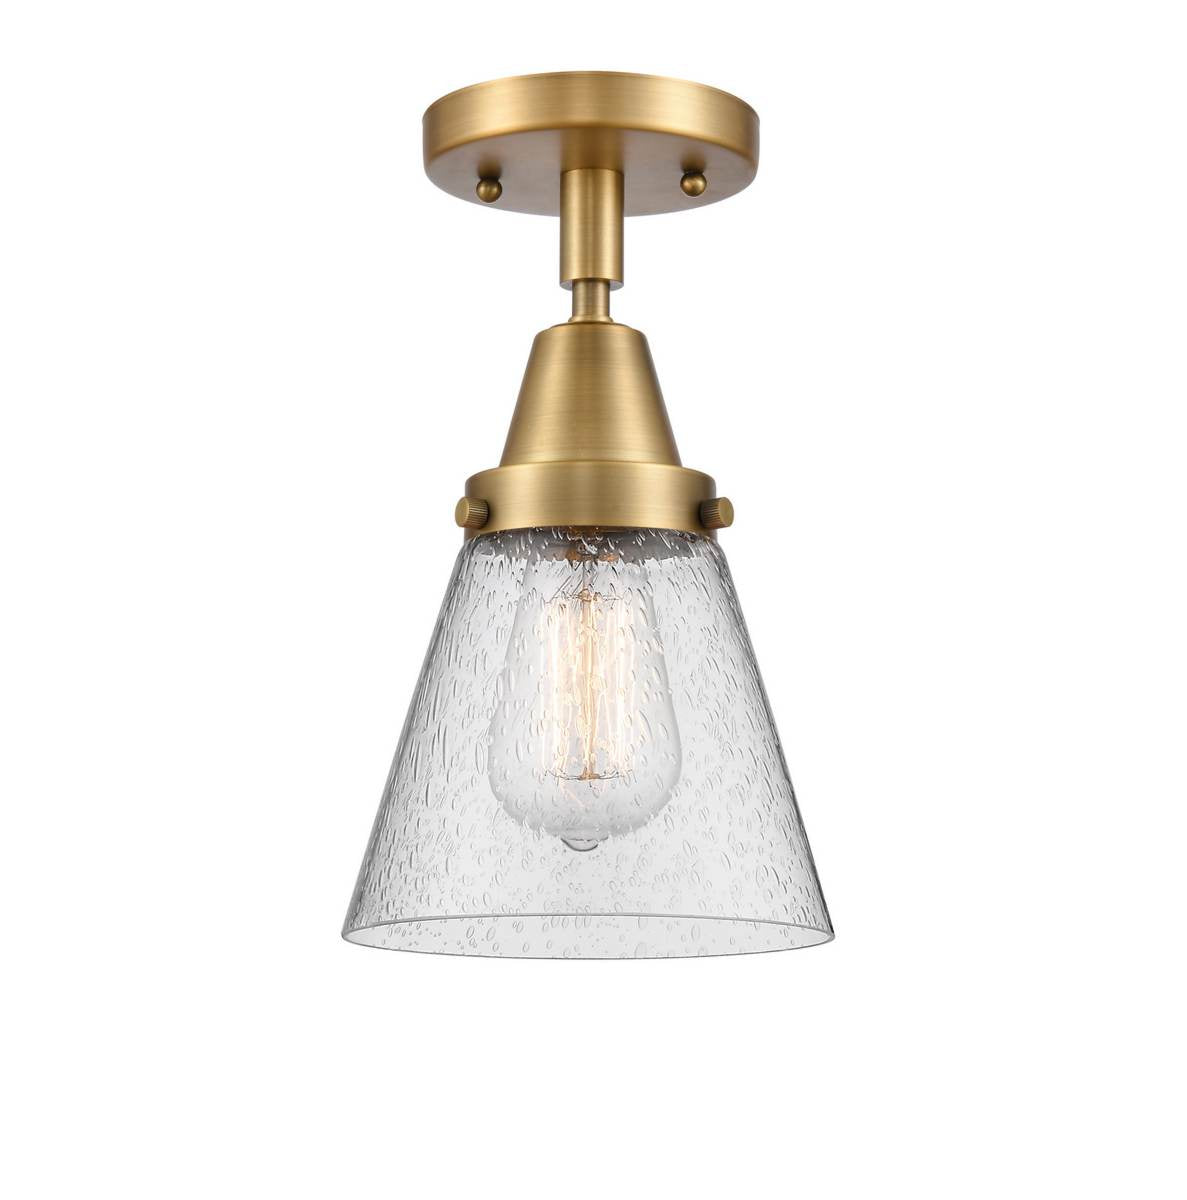 447-1C-BB-G64 1-Light 6.25" Brushed Brass Flush Mount - Seedy Small Cone Glass - LED Bulb - Dimmensions: 6.25 x 6.25 x 10 - Sloped Ceiling Compatible: No